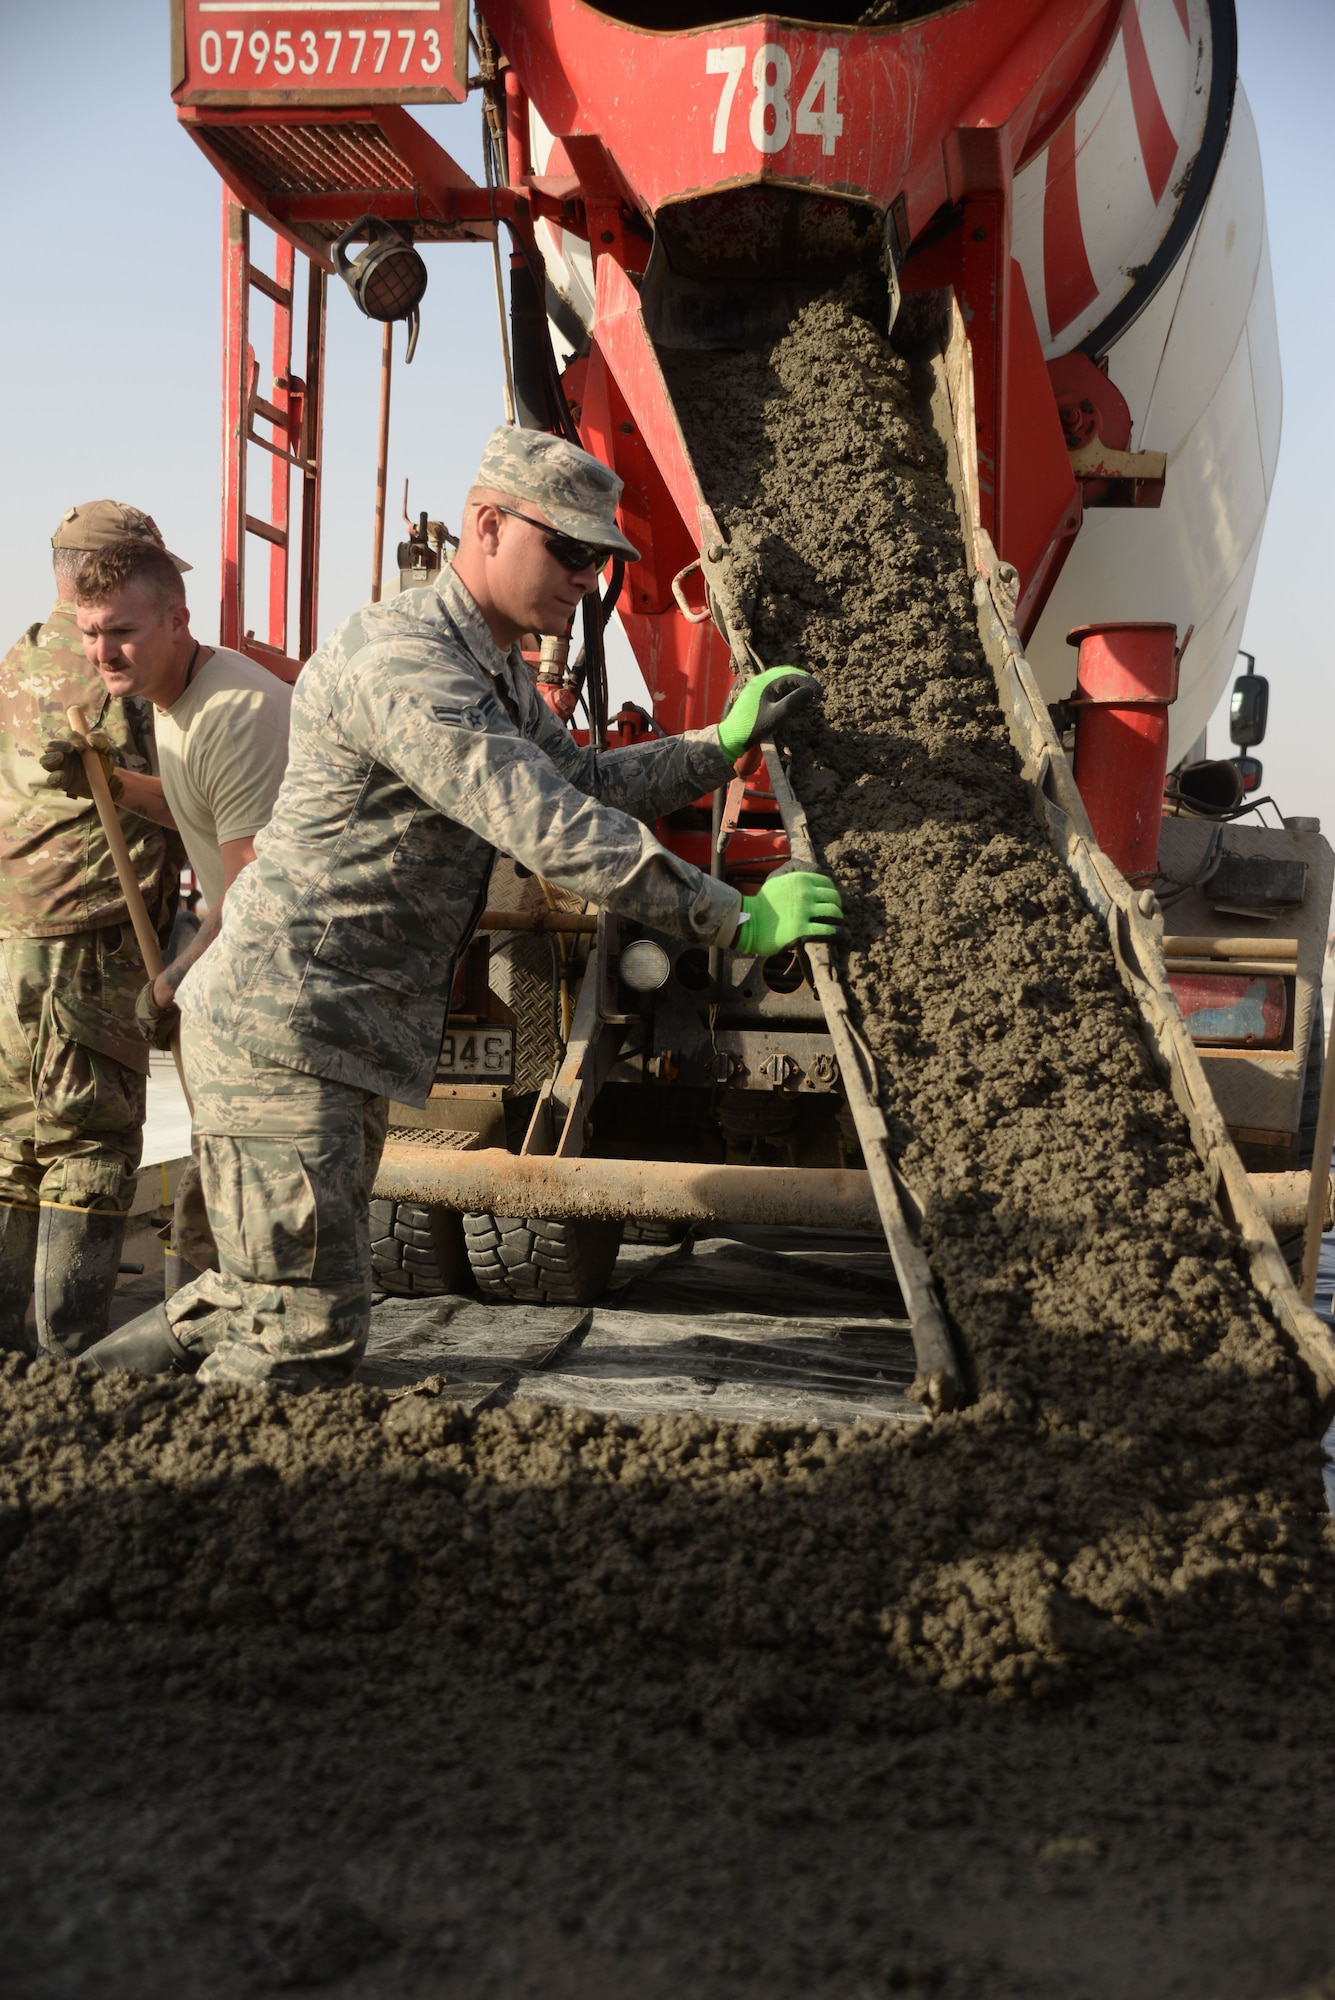 Airman 1st Class Jerre Myrick, a heavy equipment operator, guides wet concrete into a slab as he and other members assigned to the 332nd Expeditionary Civil Engineer Squadron repair a damaged runway at an undisclosed location in Southwest Asia Nov. 28, 2017. The team is in the process of repairing more than 60 dilapidated slabs, and 425 spalls. (U.S. Air Force photo by Senior Master Sgt. Cohen A. Young)